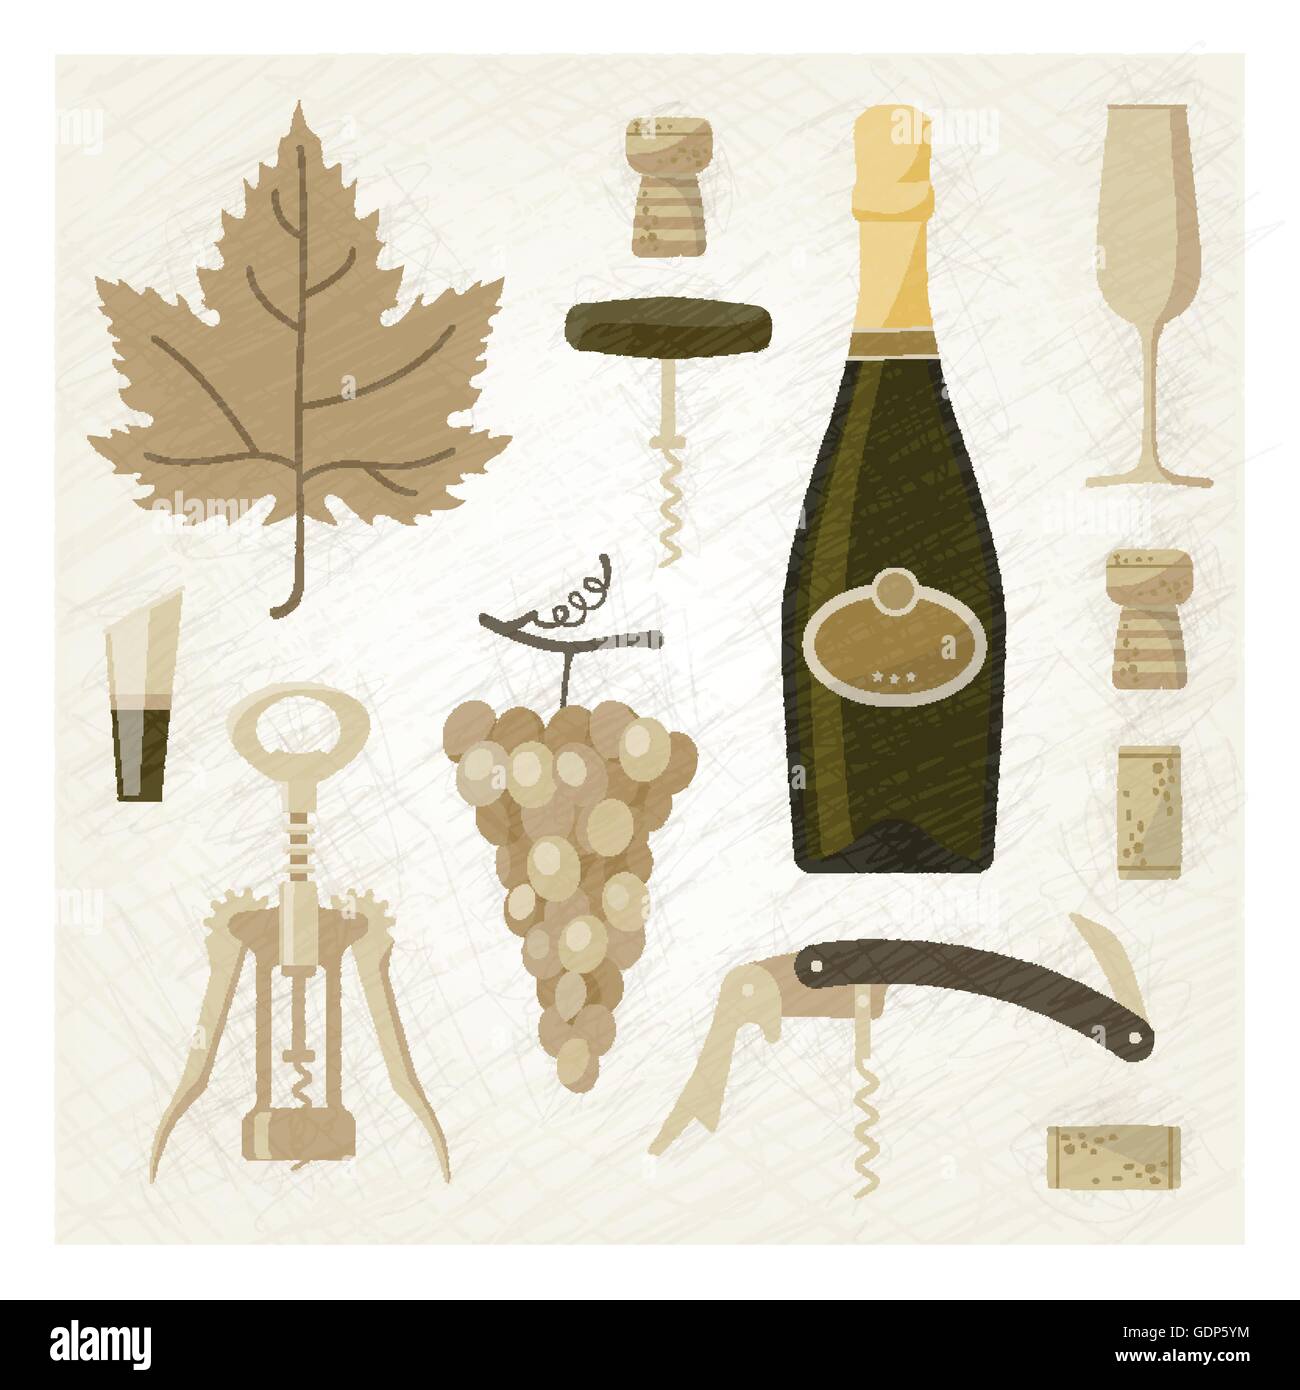 White and sparkling wine vintage illustration with wine bottle, glass, vine, corks and corkscrew Stock Vector